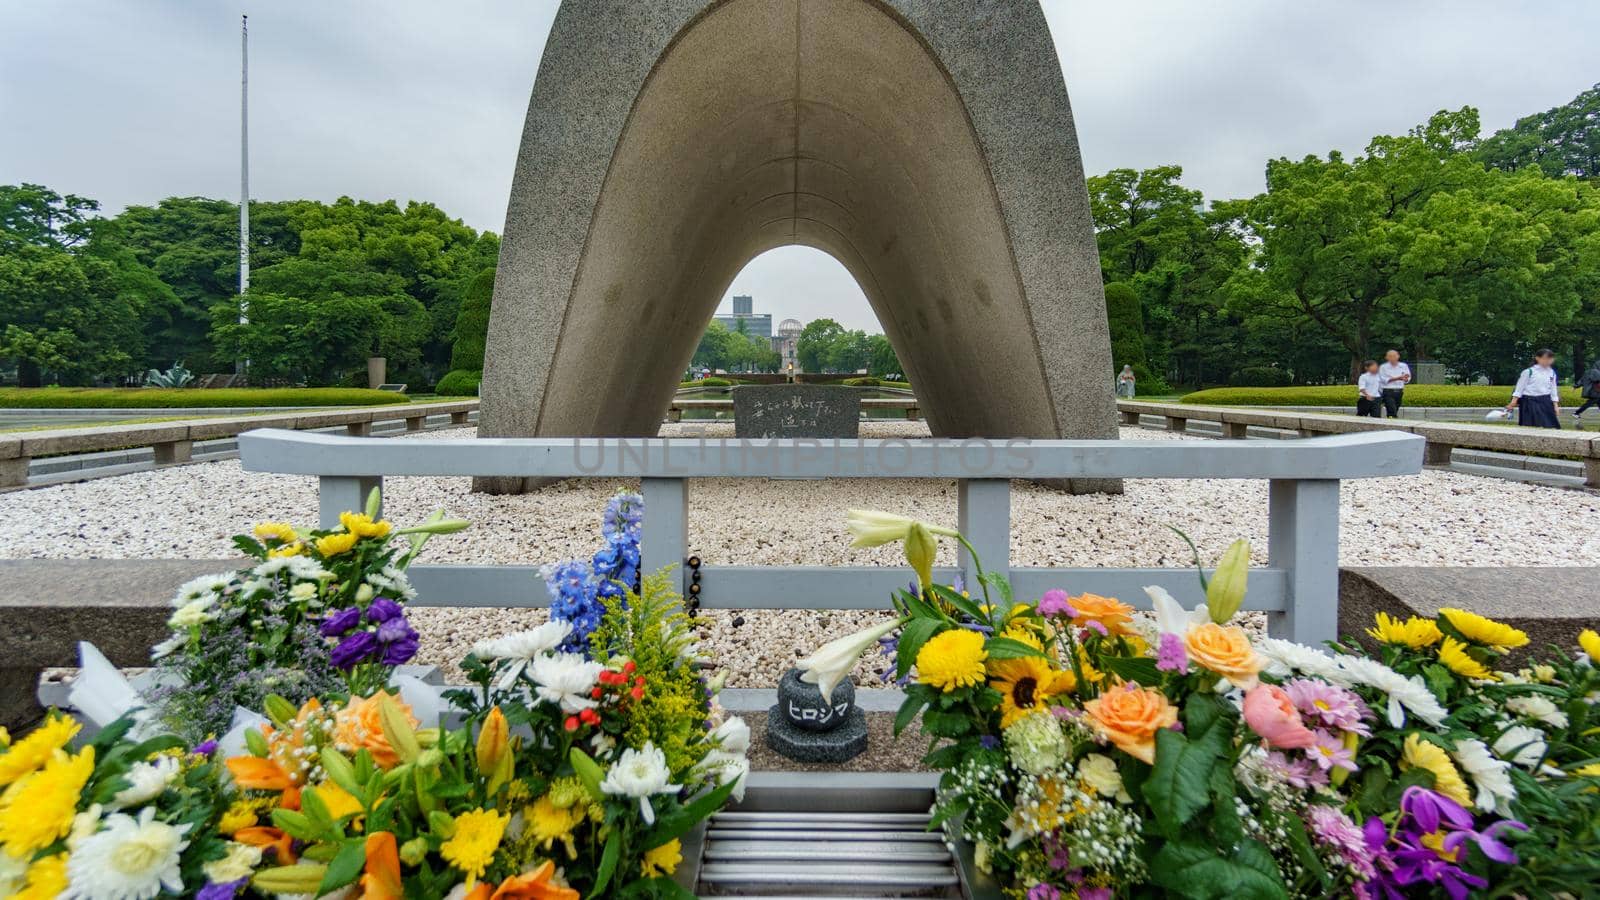 Wide angle view of Hiroshima memorial and Bomb Dome, Japan.